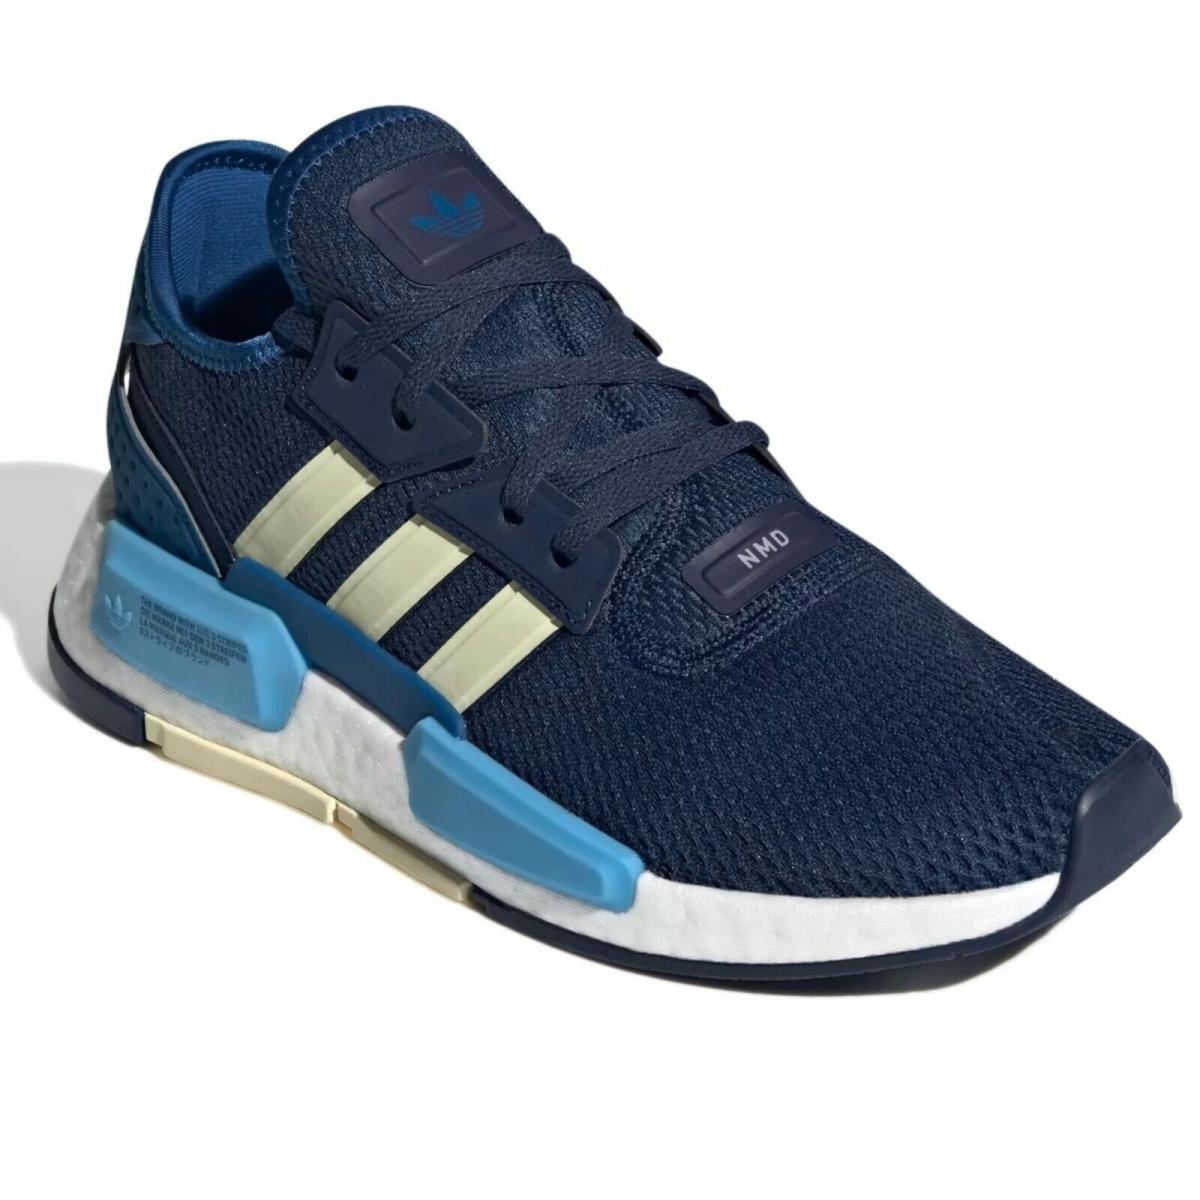 Adidas Originals NMD_G1 Men`s Sneakers Casual Sport Shoes Running Training Blue